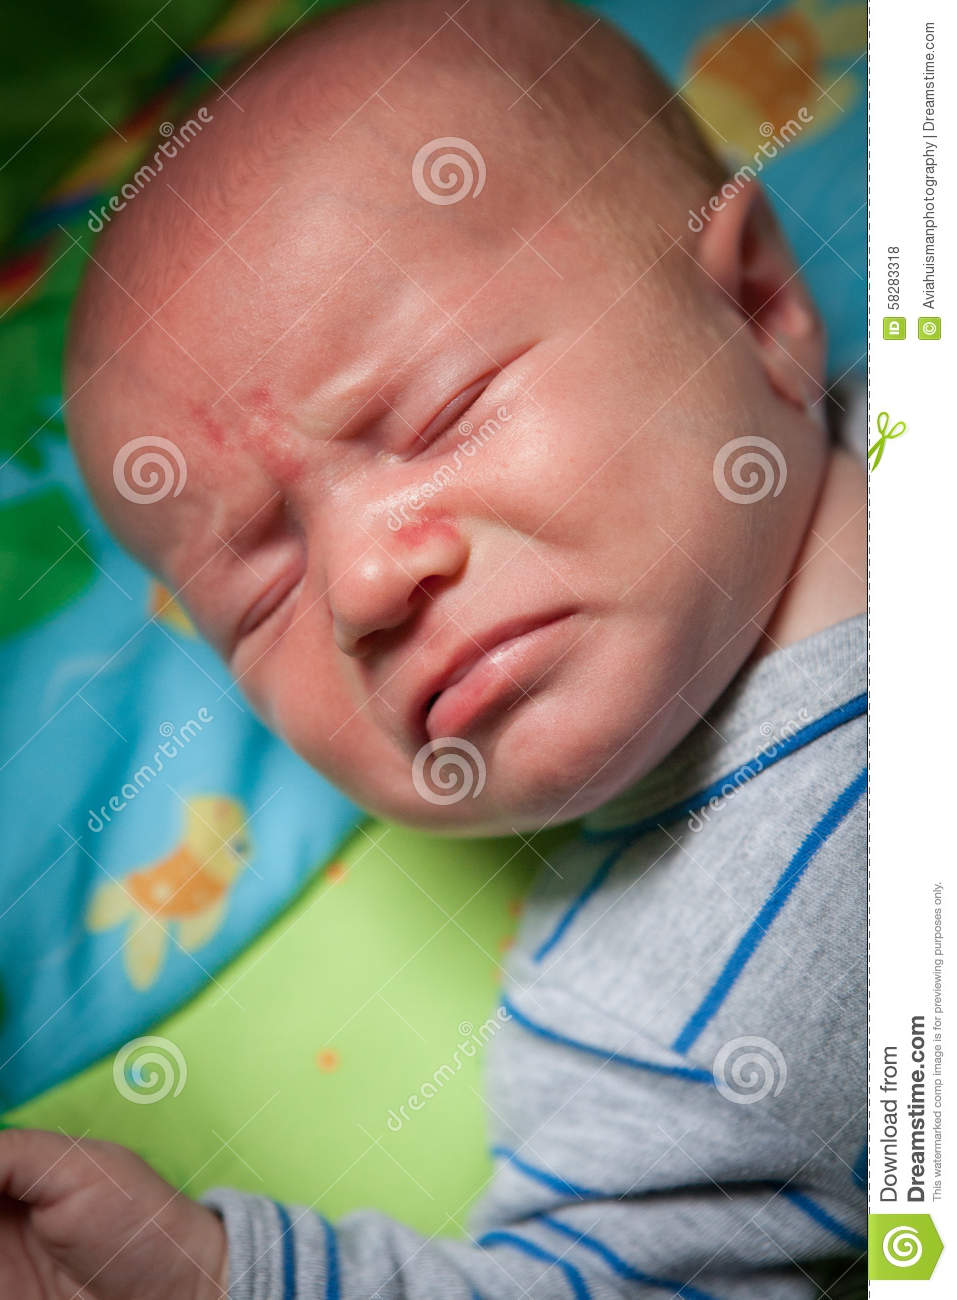 Baby Crying With Angry Expression Frowning Lying On Colorful Blanket